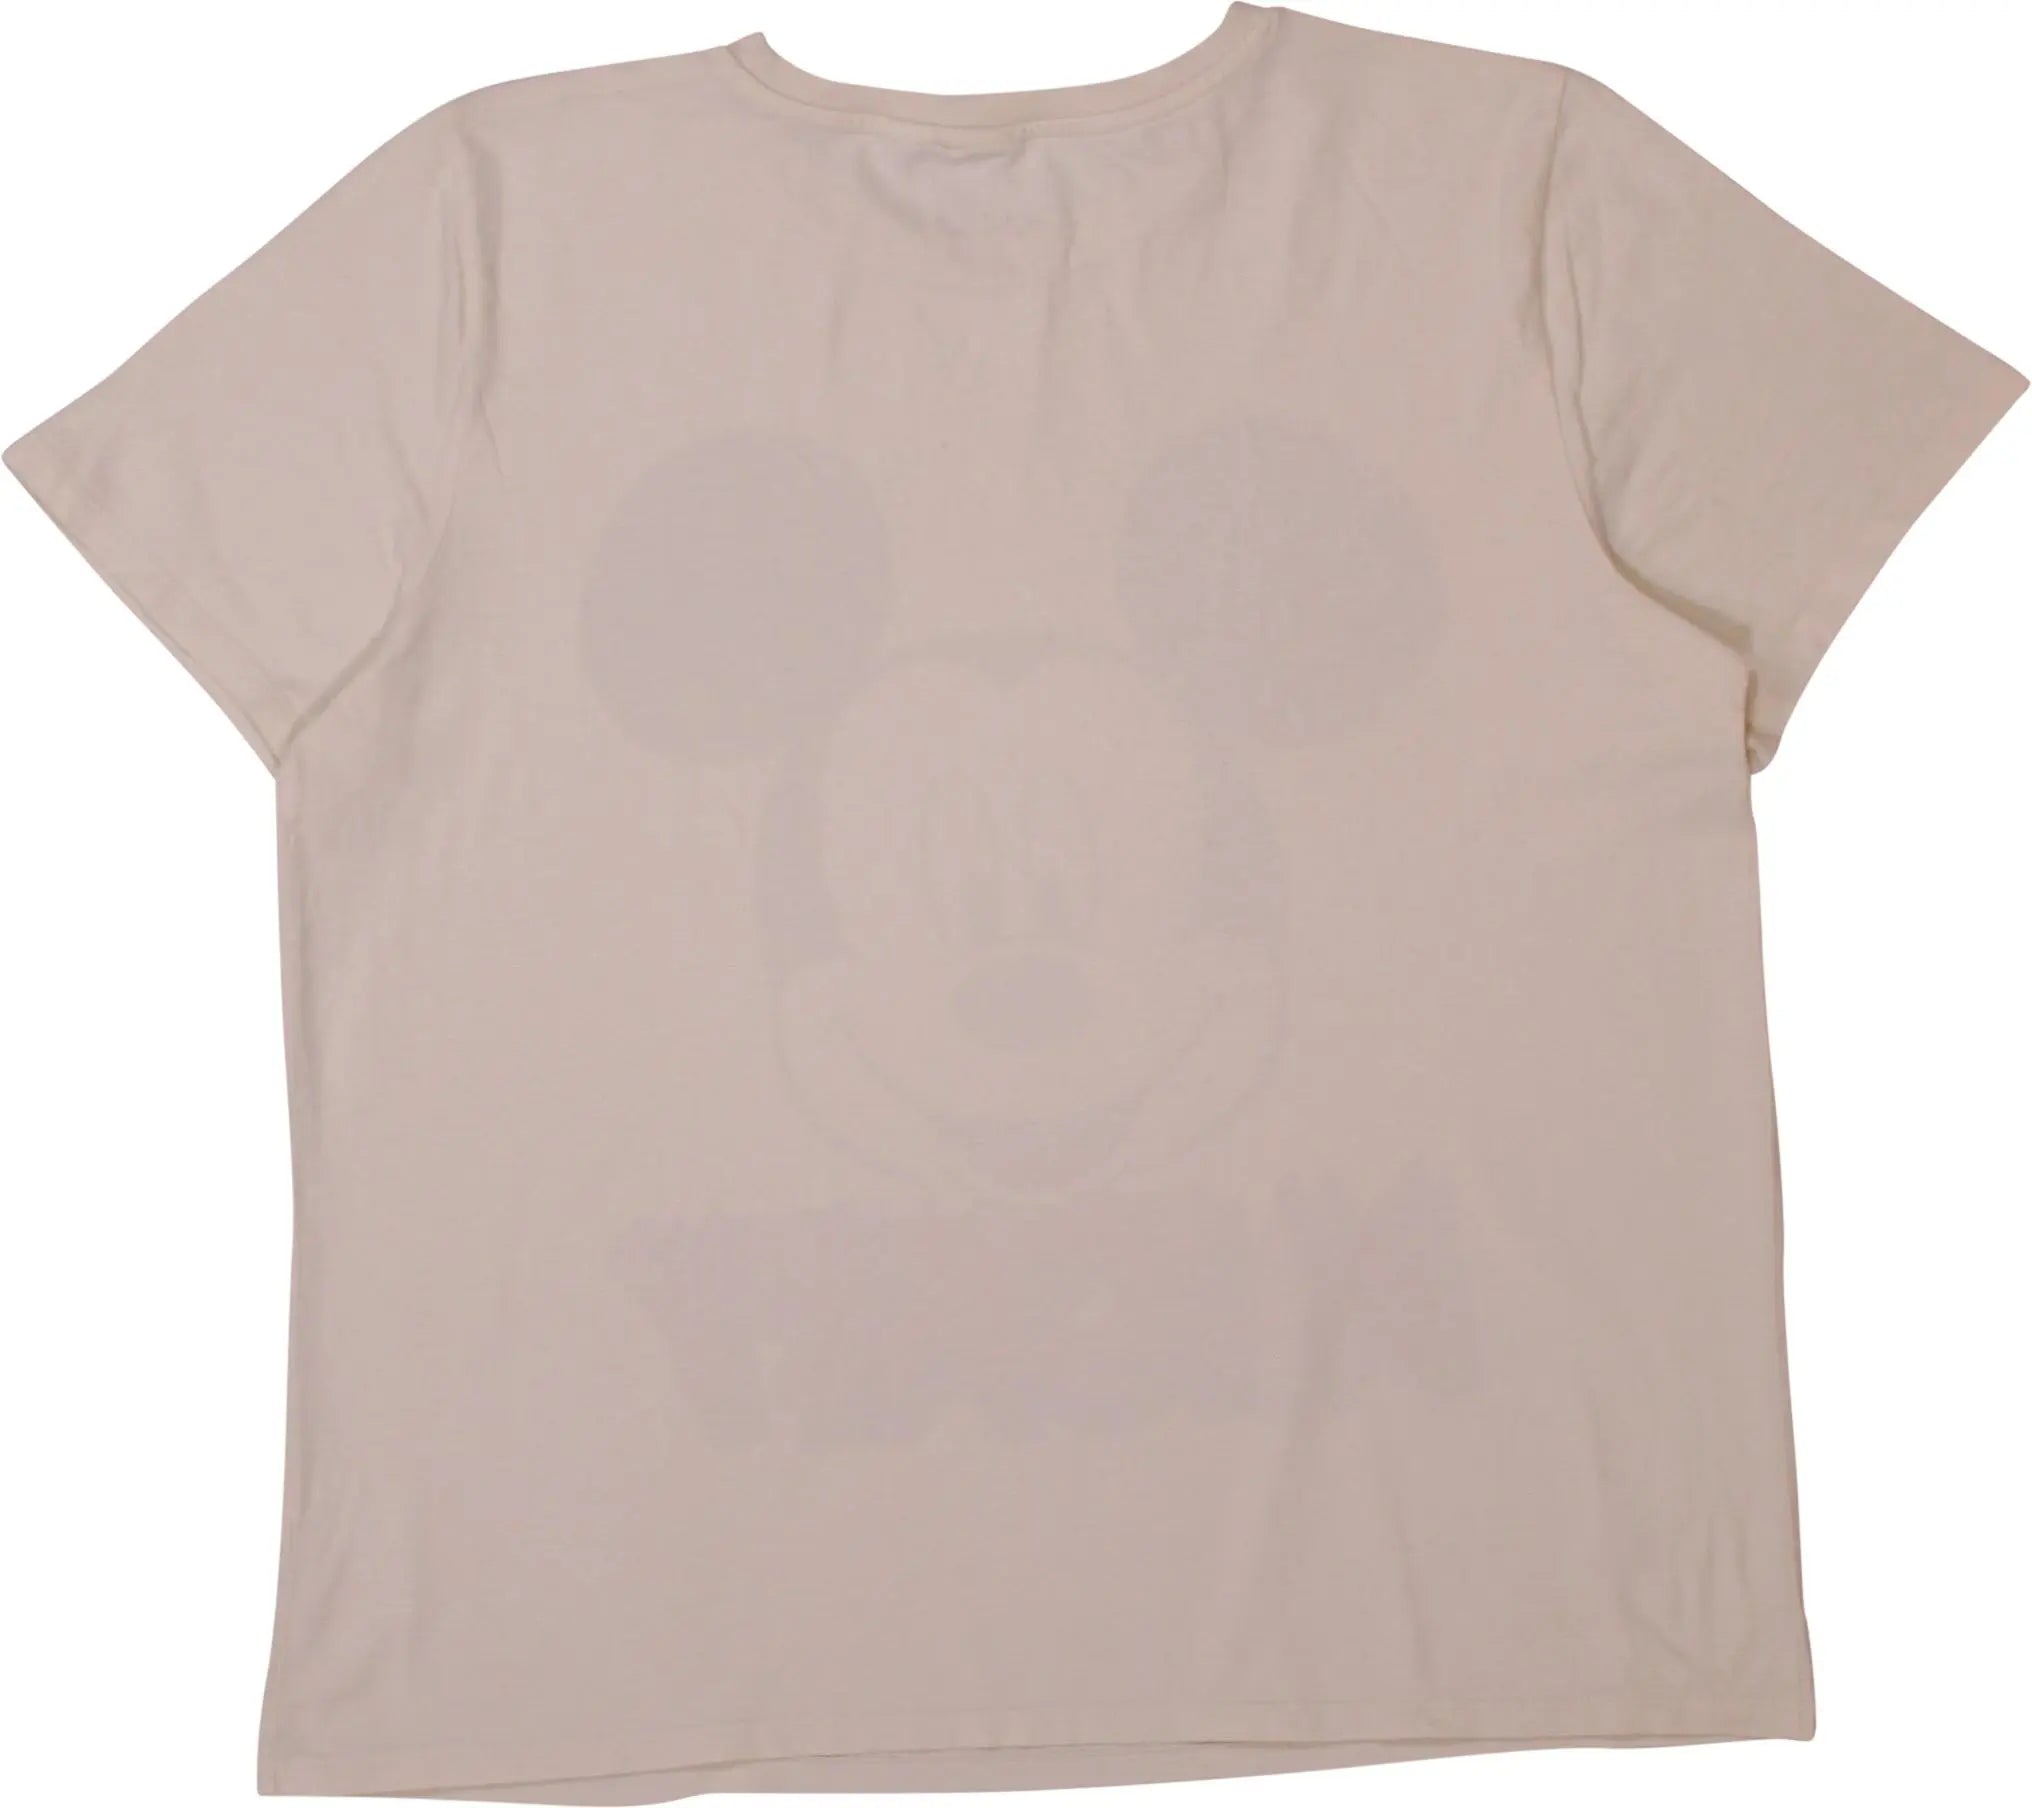 Unknown - Mickey T-shirt- ThriftTale.com - Vintage and second handclothing